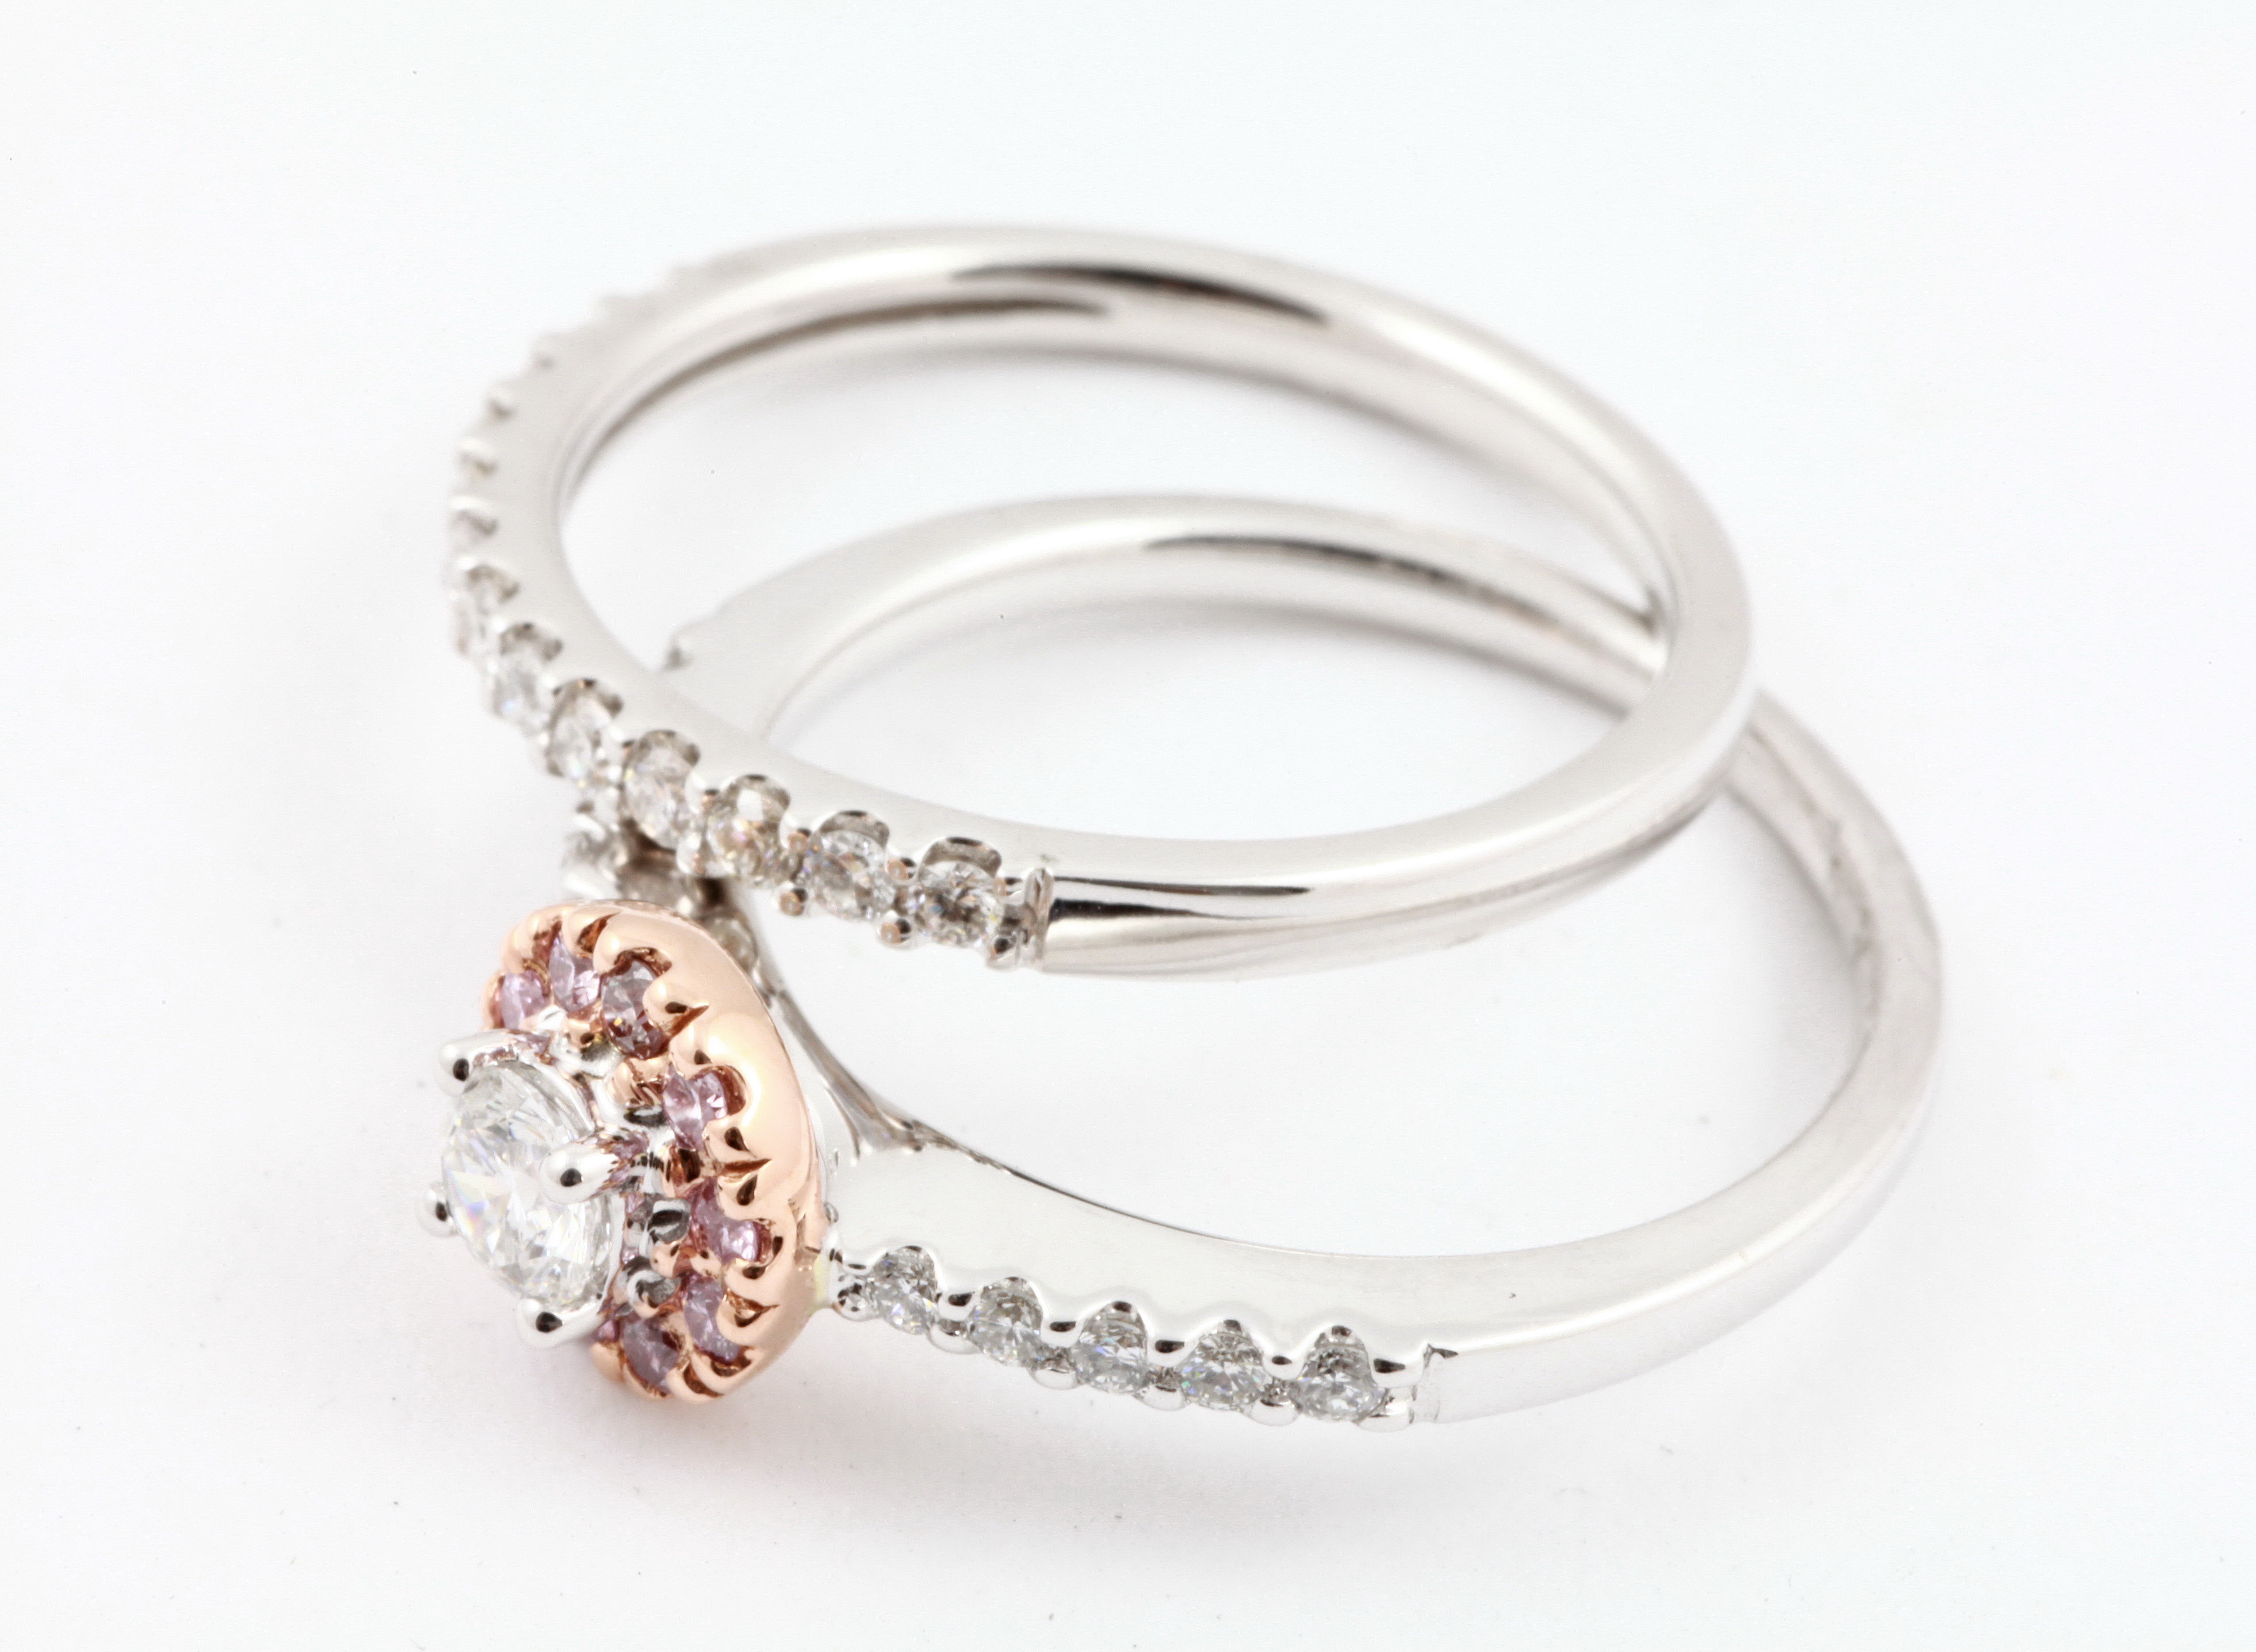 Donâ€™t miss out on owning a spectacular pink diamond before they sell ...